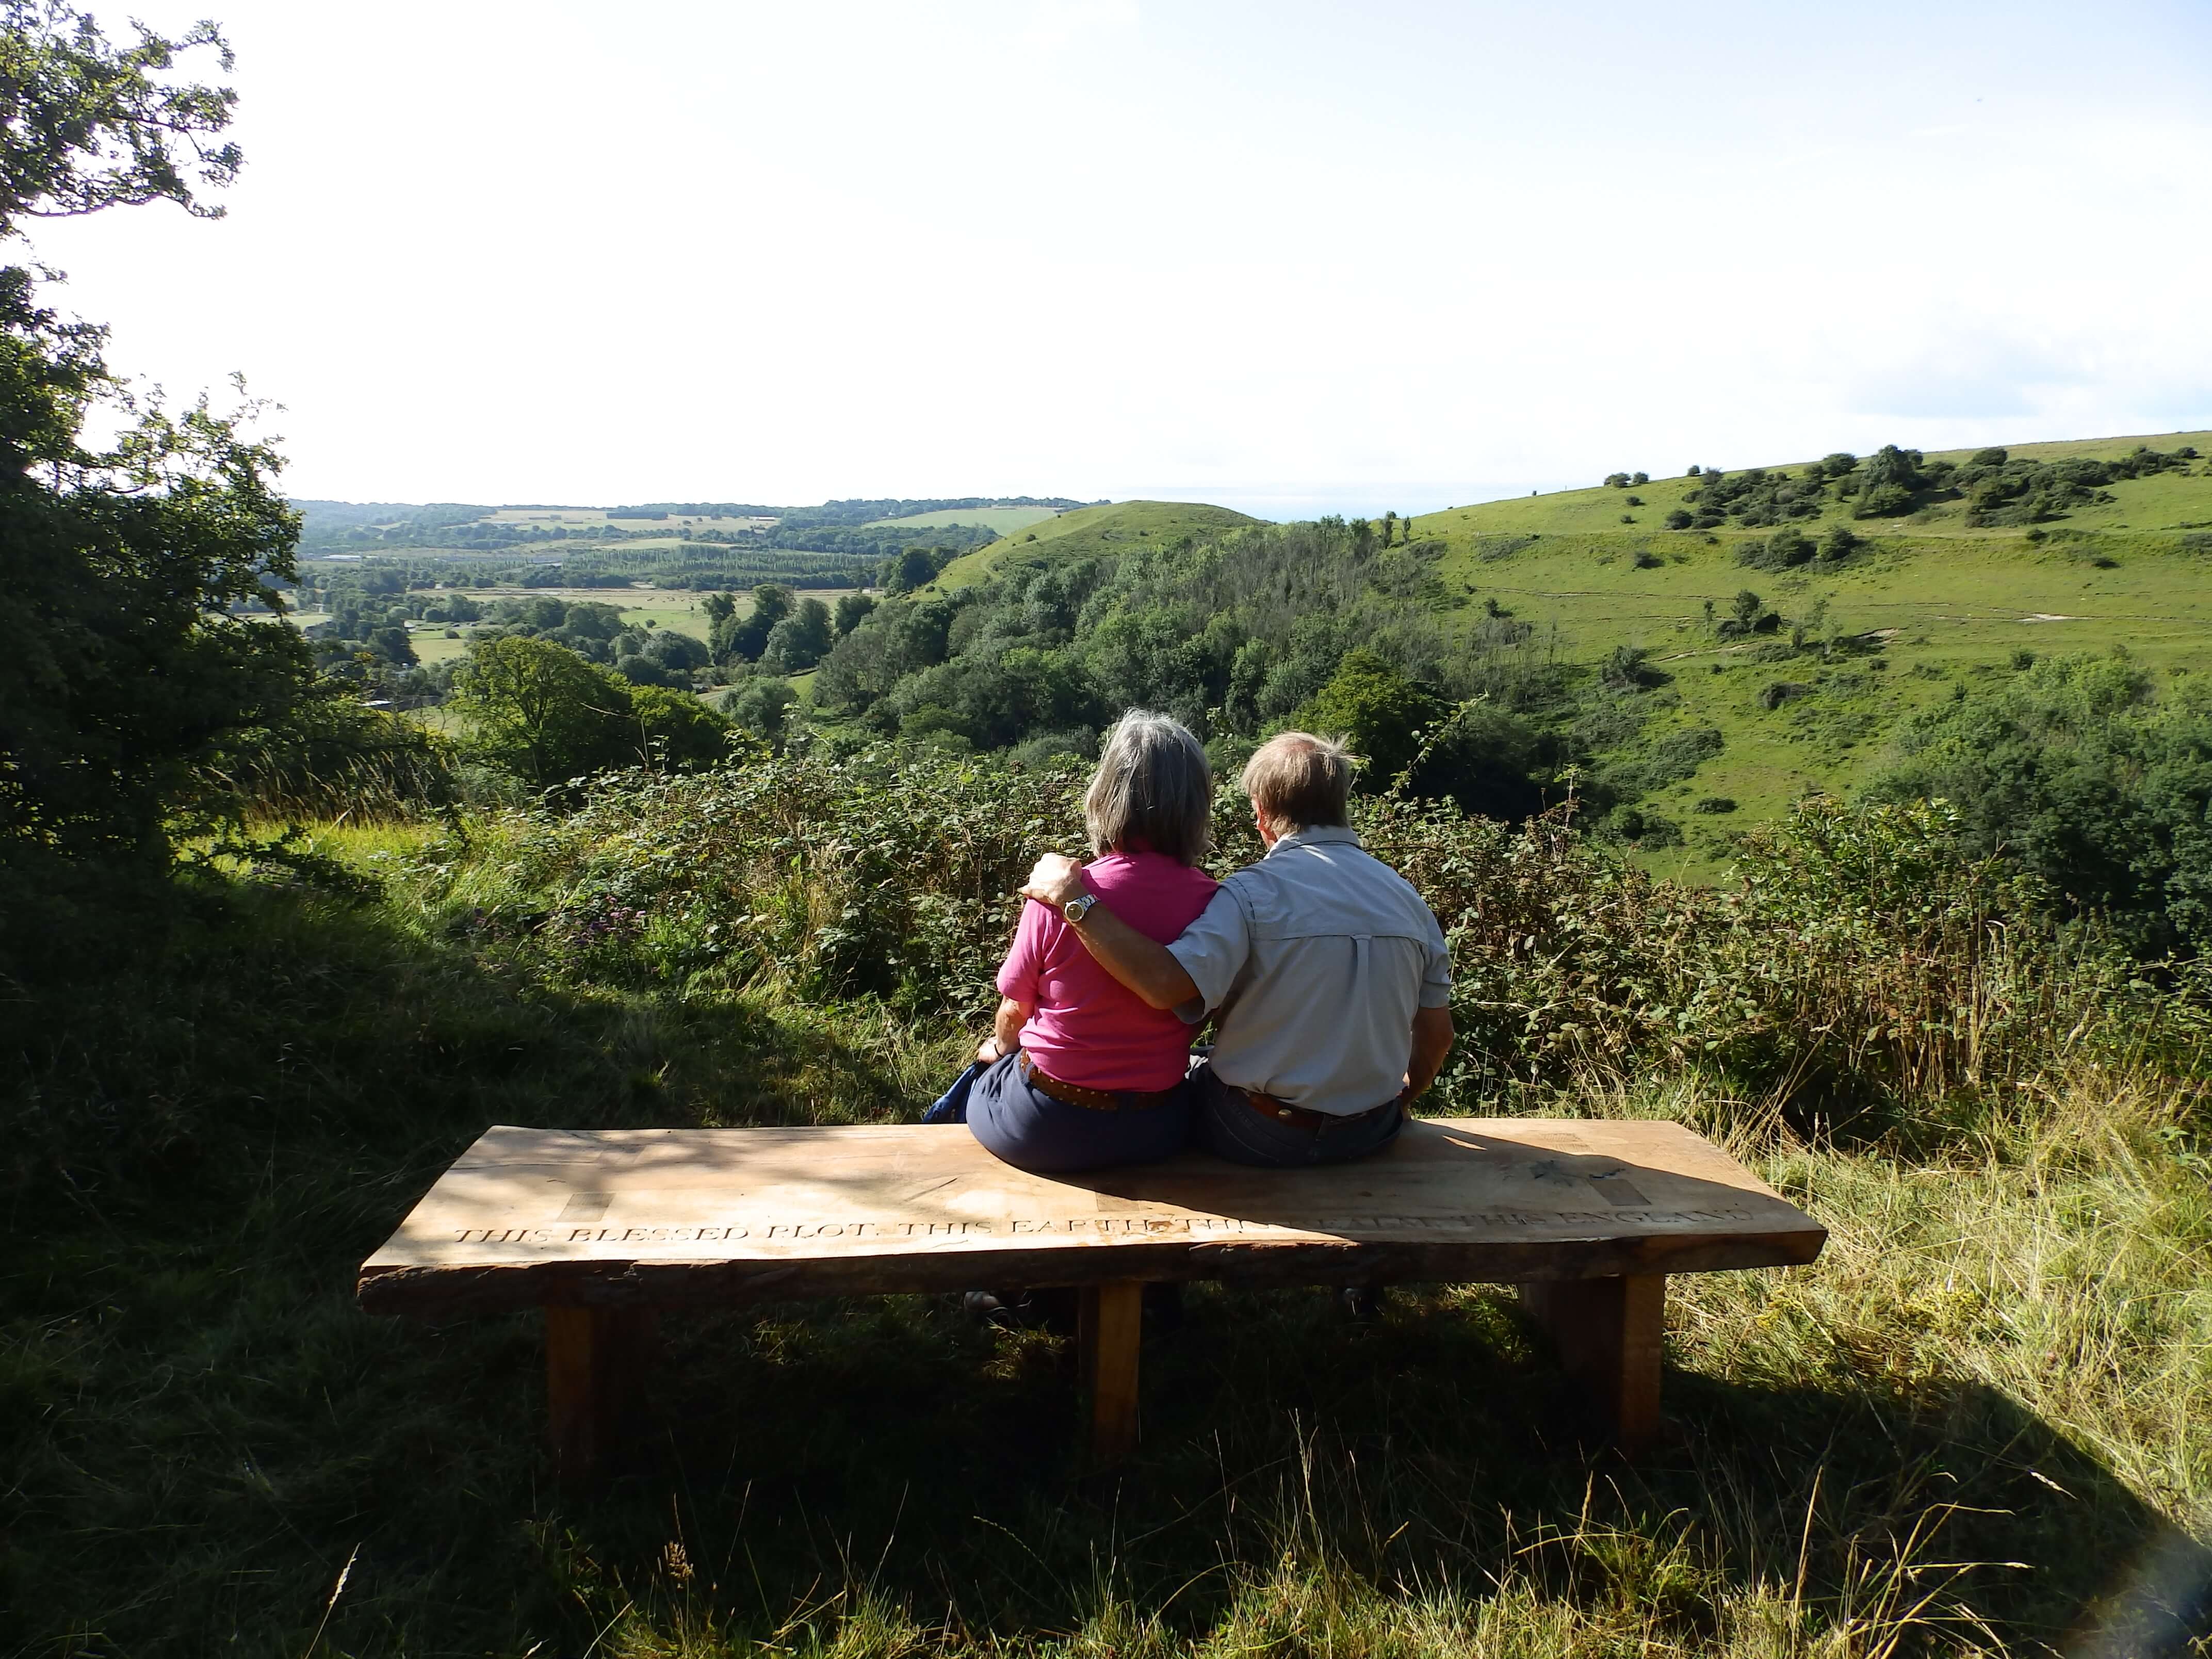 Two people seat on bench overlooking view across green fields and trees.